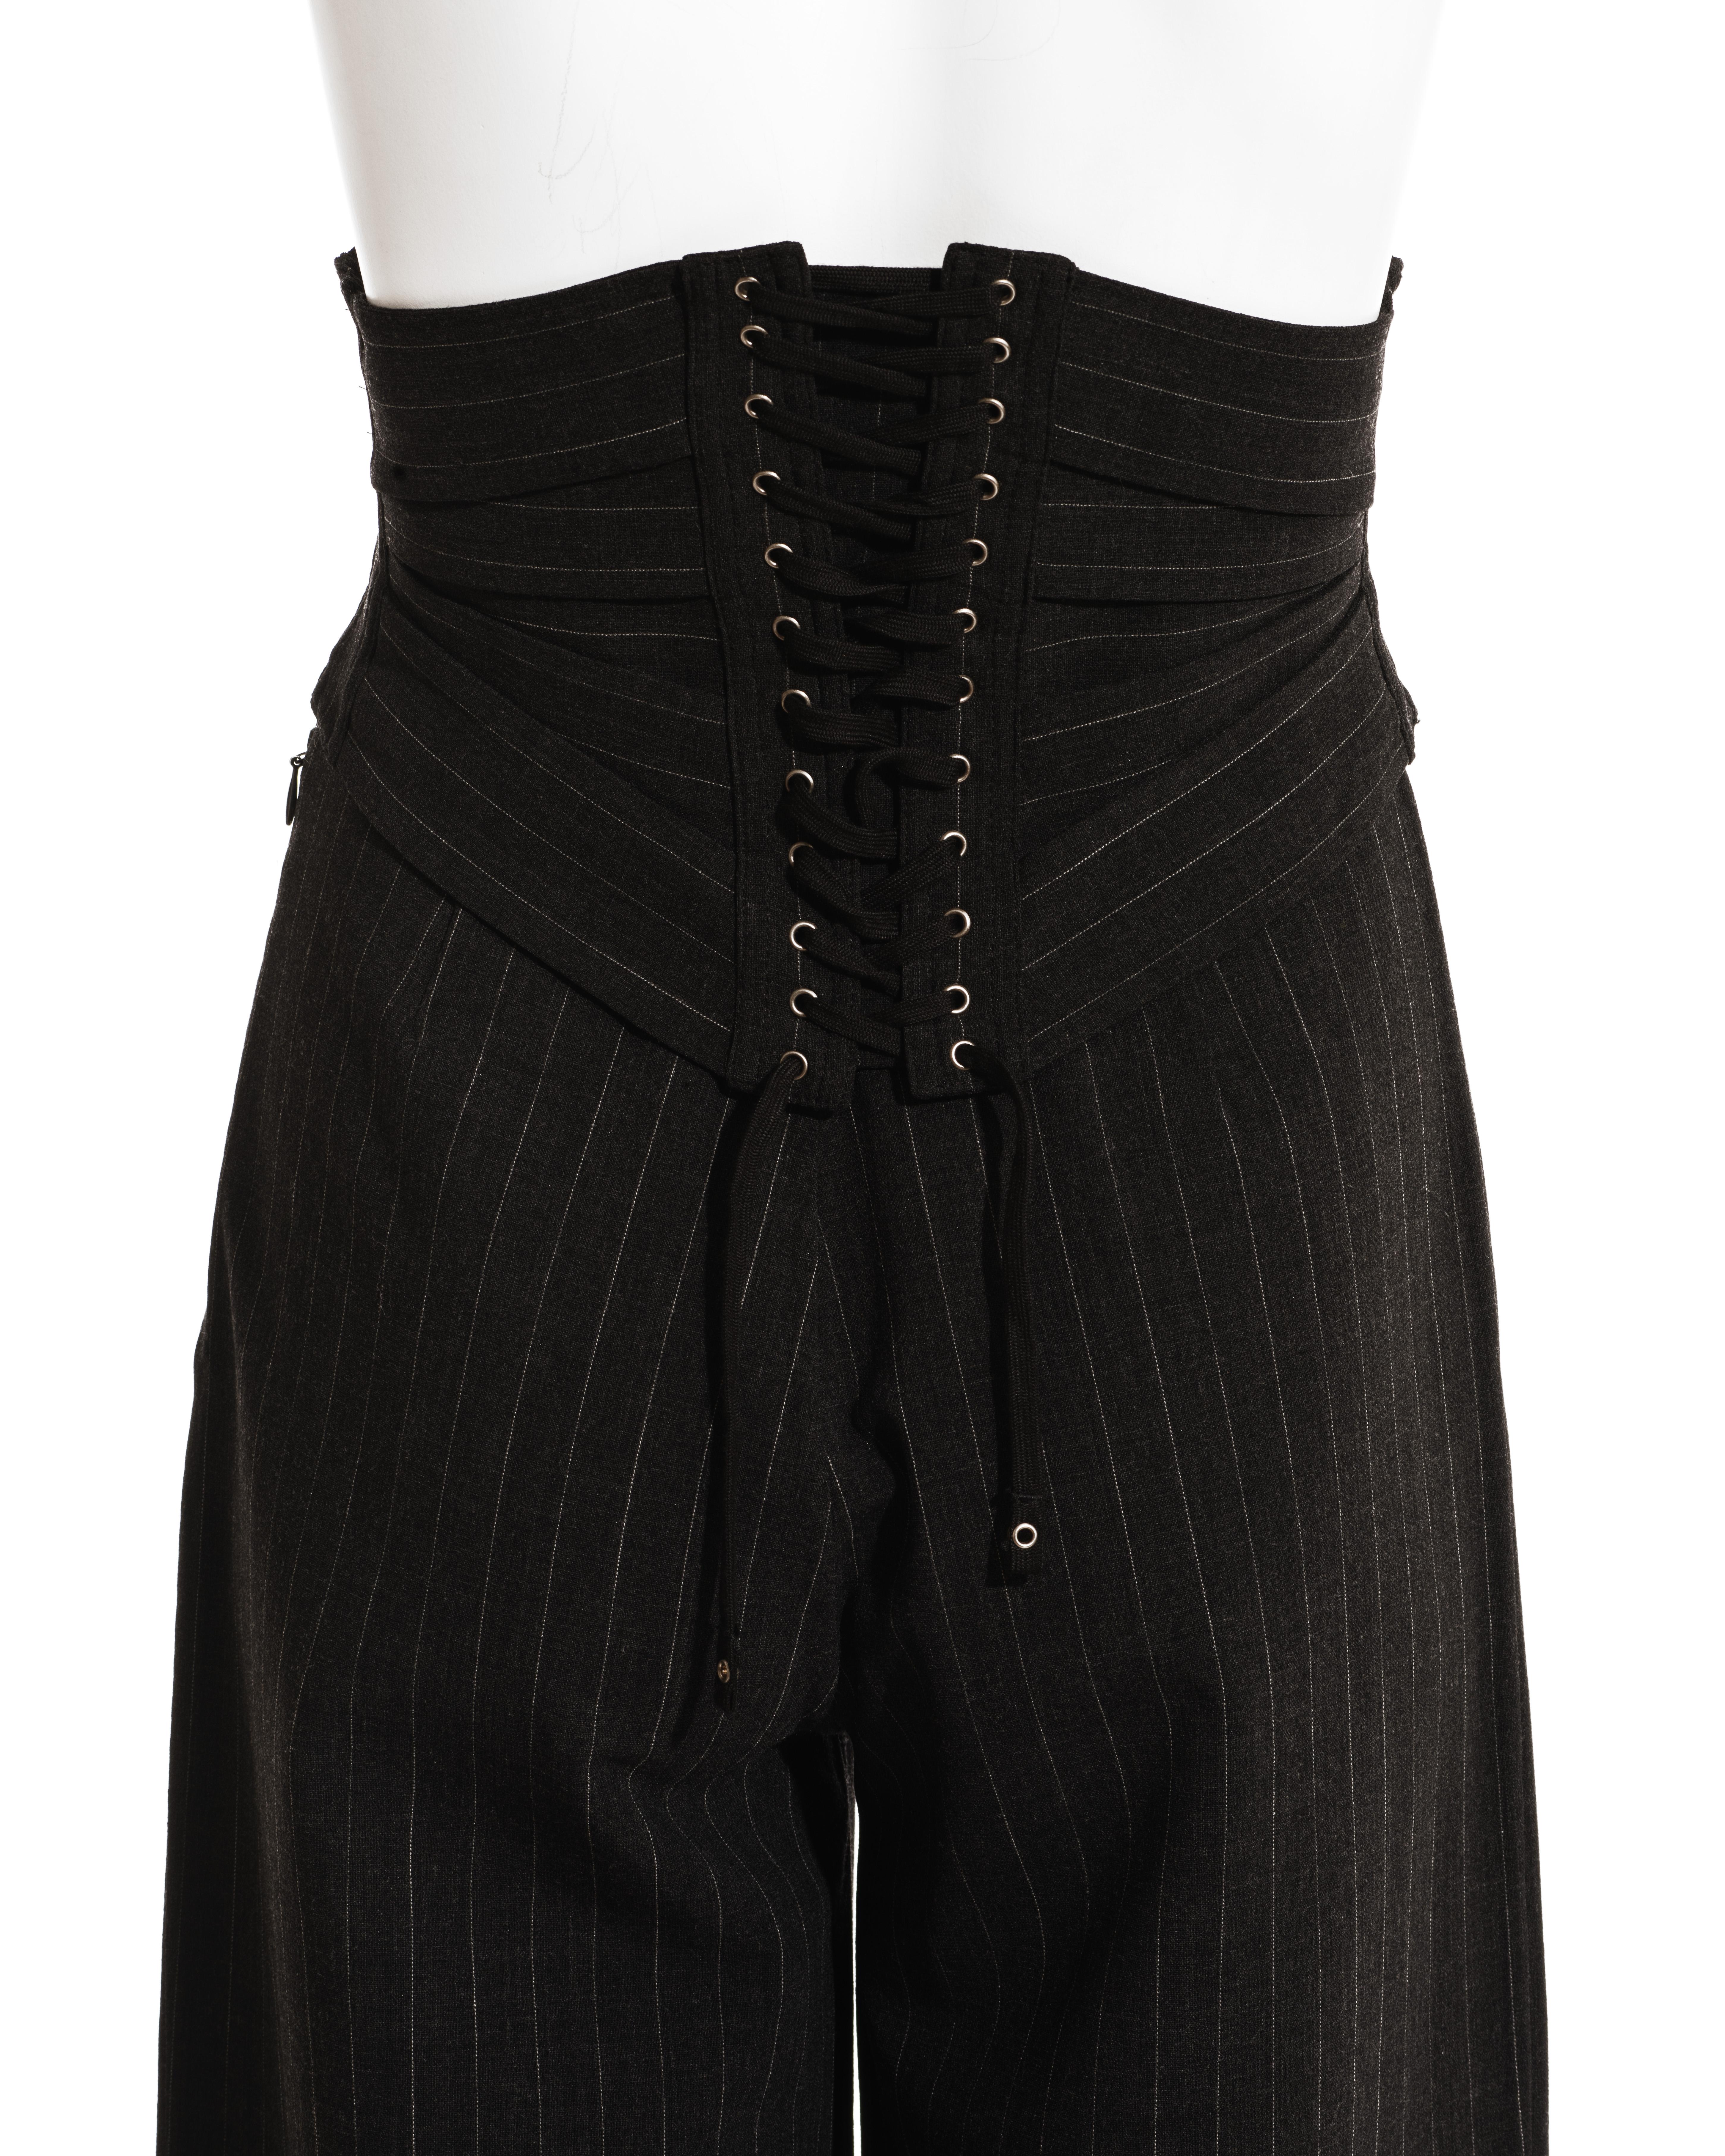 Jean Paul Gaultier grey pinstripe wool three piece corseted pant suit, c. 2000s For Sale 1